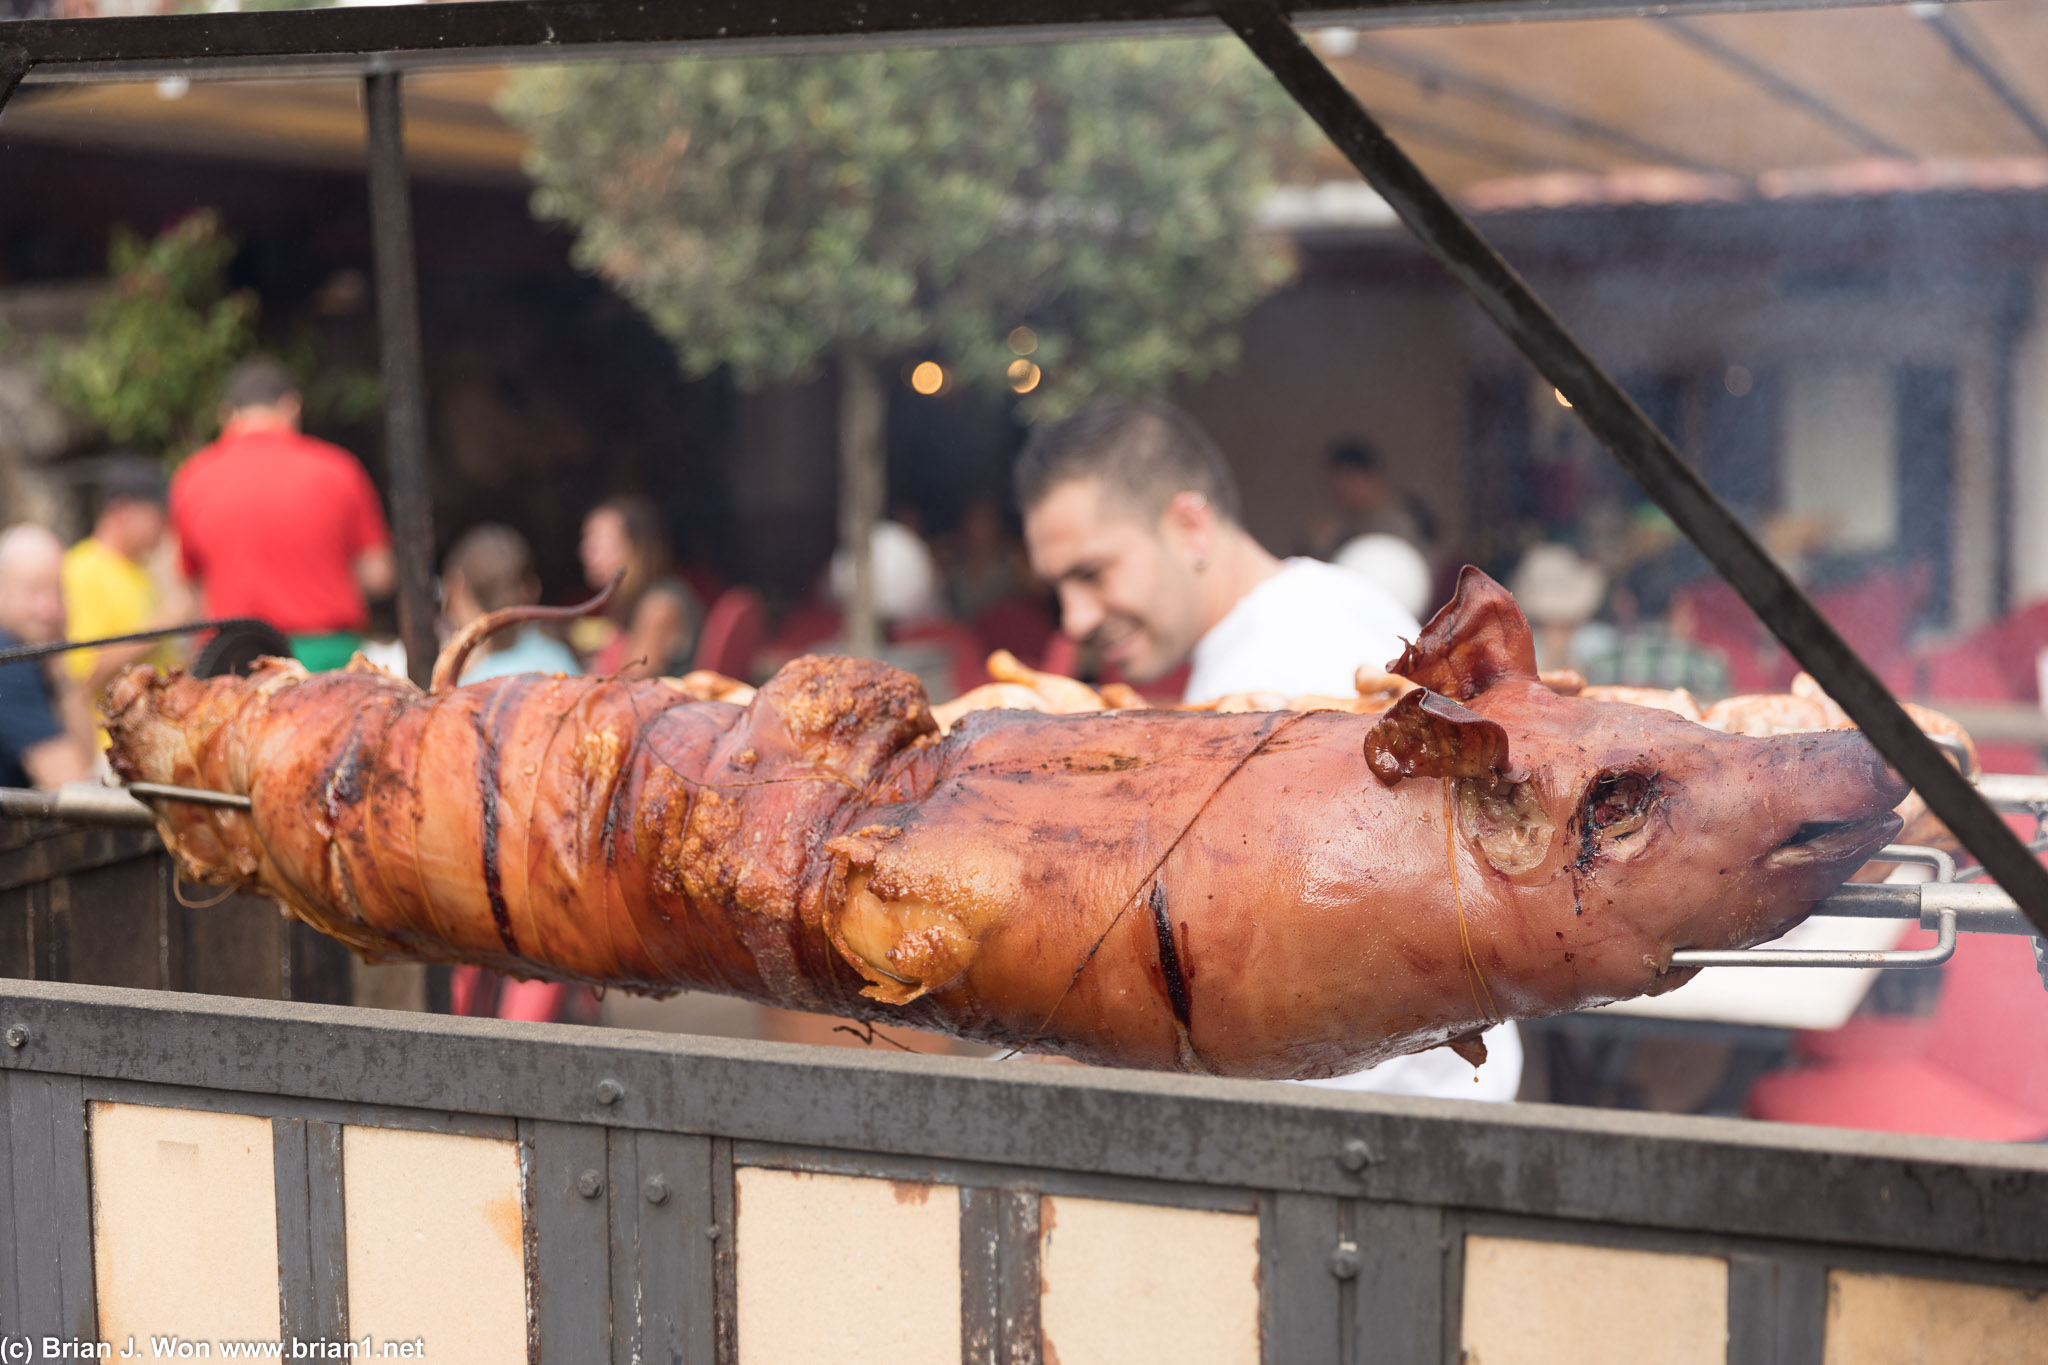 This pizza joint in Grindelwald had a brilliant idea to lure in tourists with the roast pig.